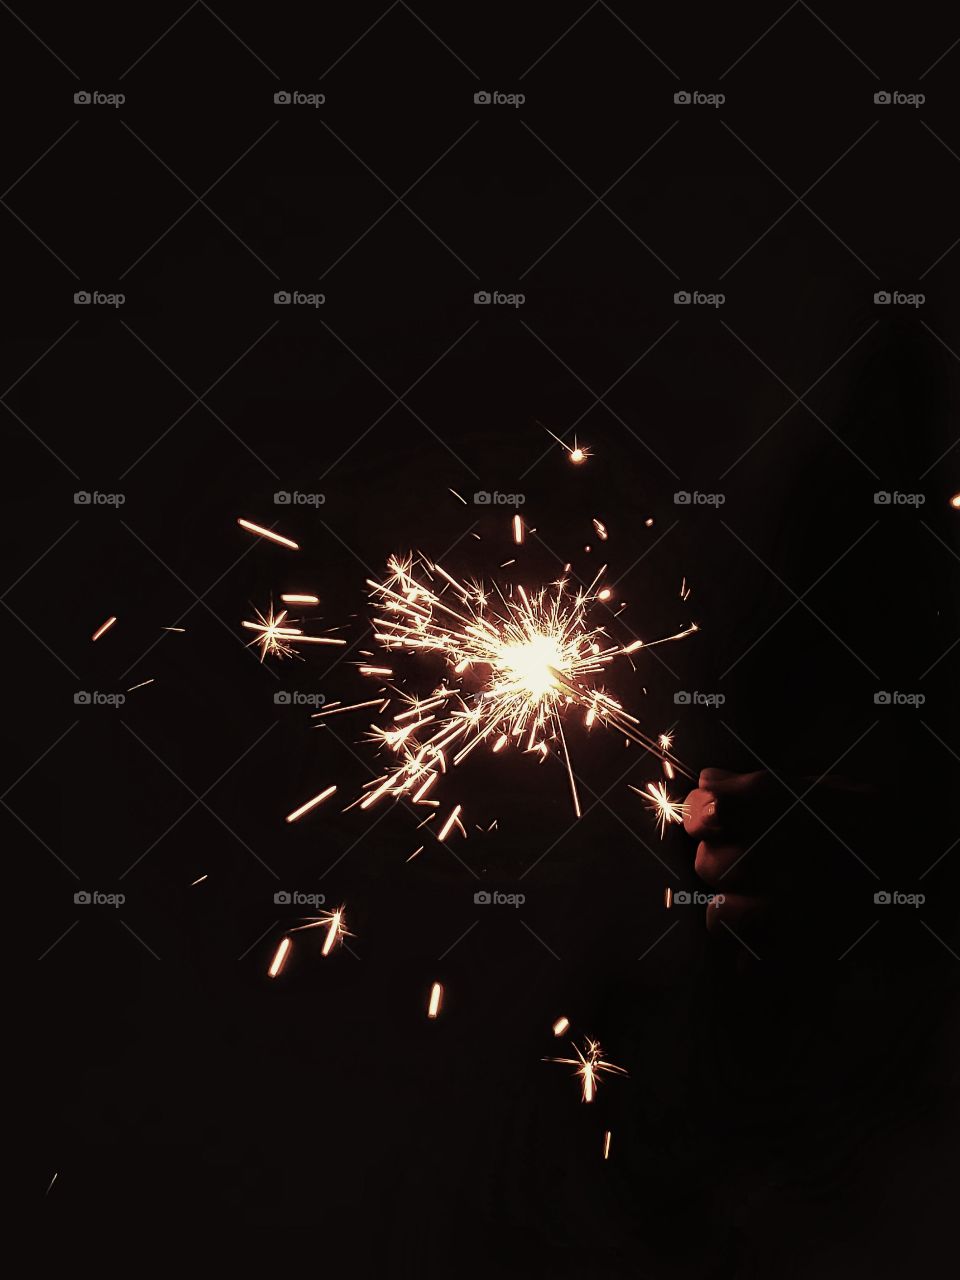 A burst of a sparkler during midnight, sending sparks all over. Taken with a Samsung Galaxy S9